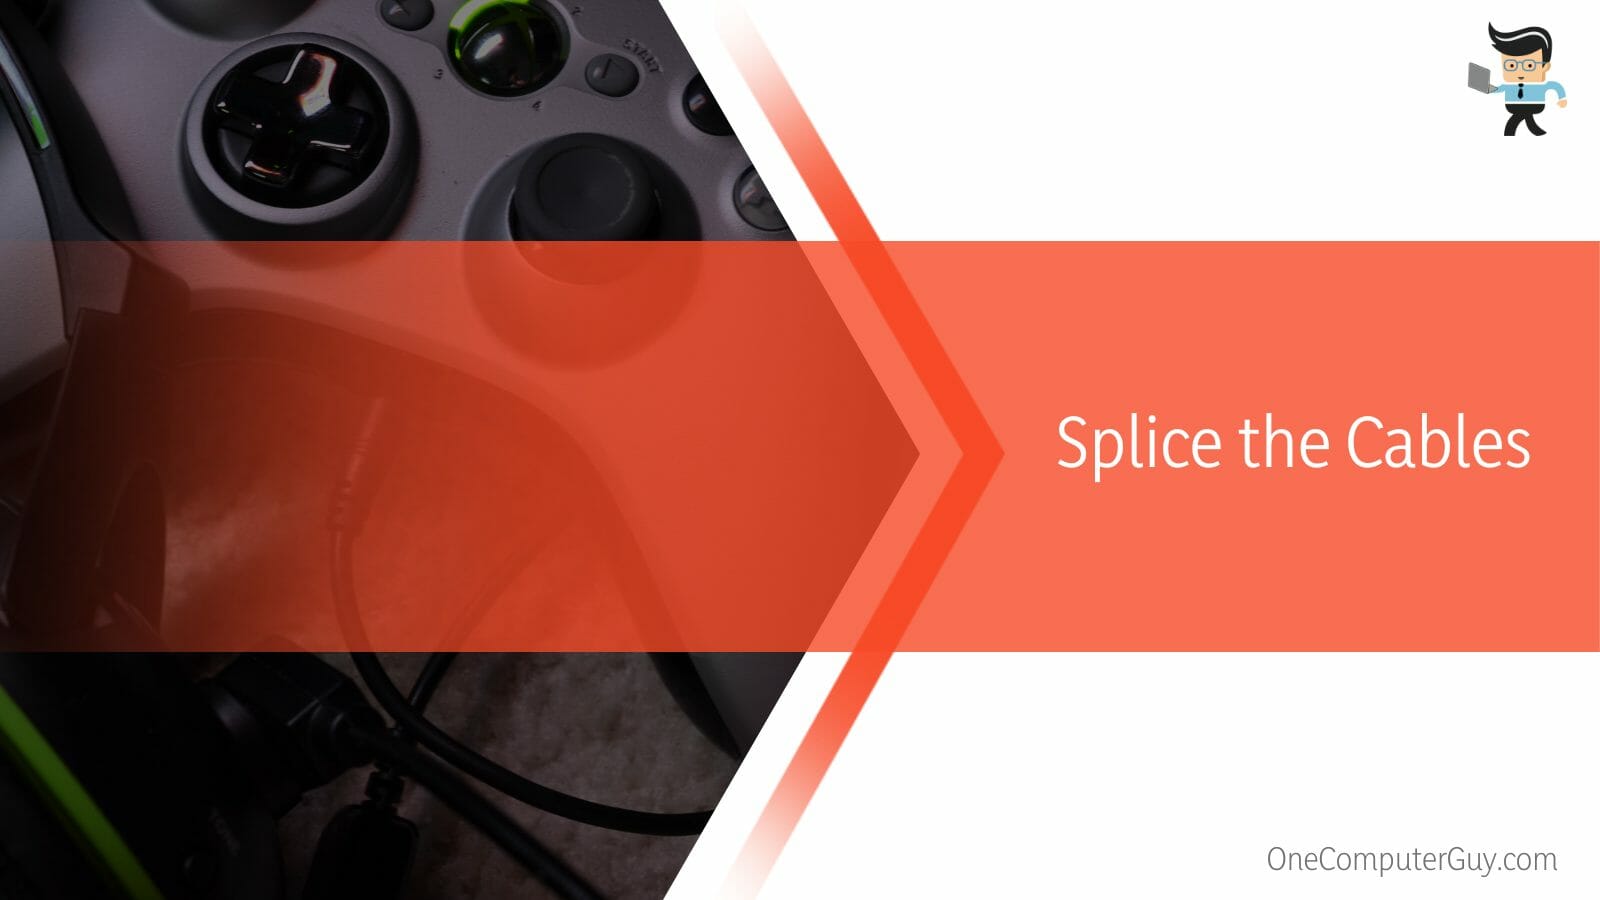 Splice the headset's Cables